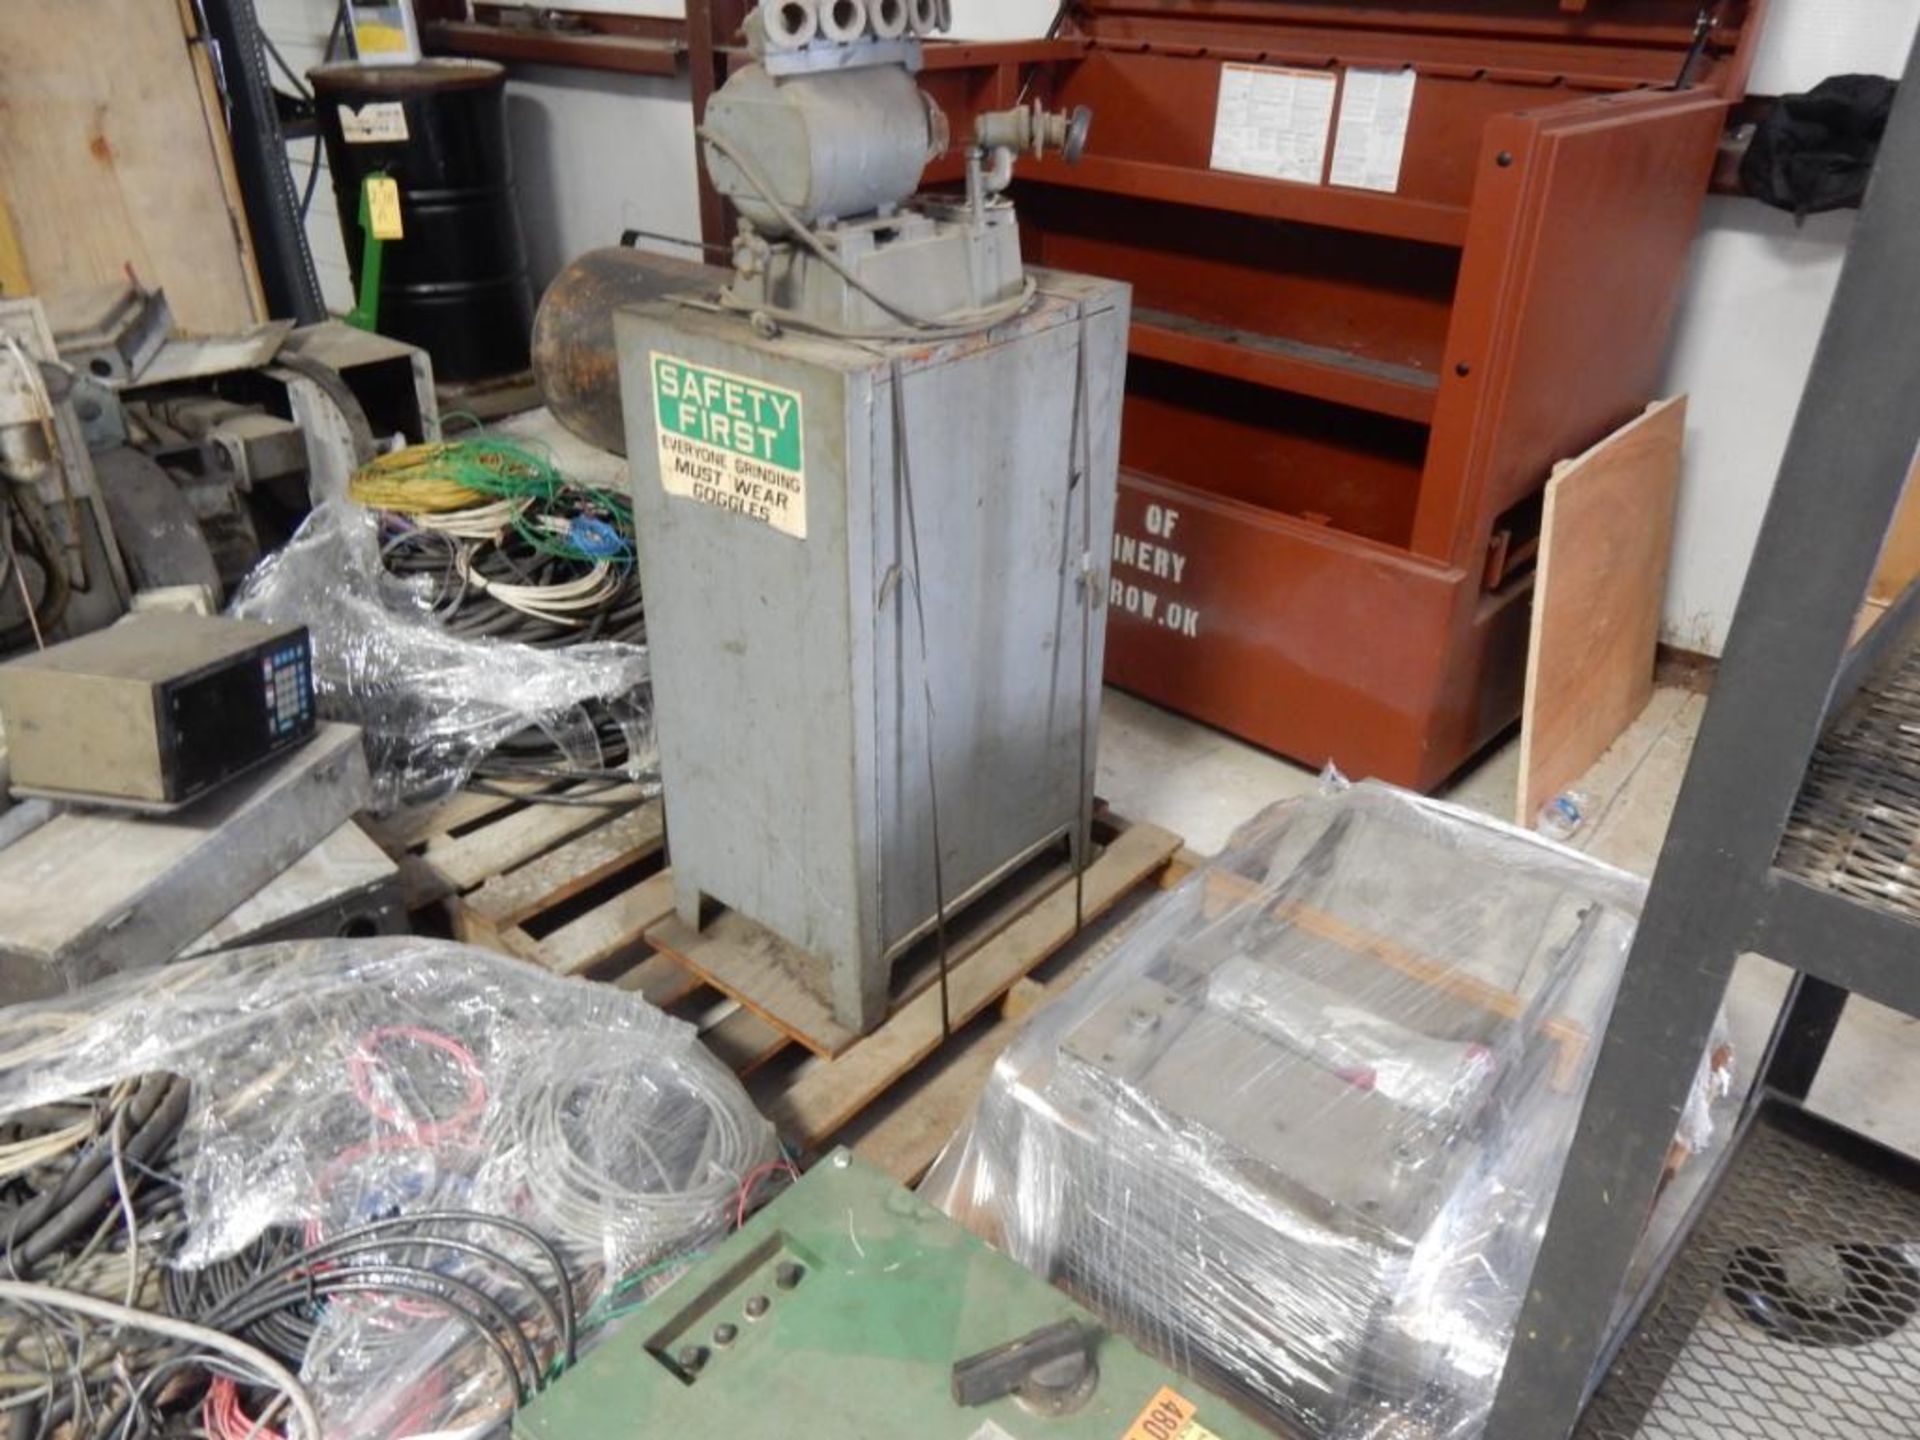 LOT MISC. ELEC. MOTORS, DRIVES, ELECTRICAL BOXES, WIRING, MACHINE PARTS, ETC. - Image 6 of 6